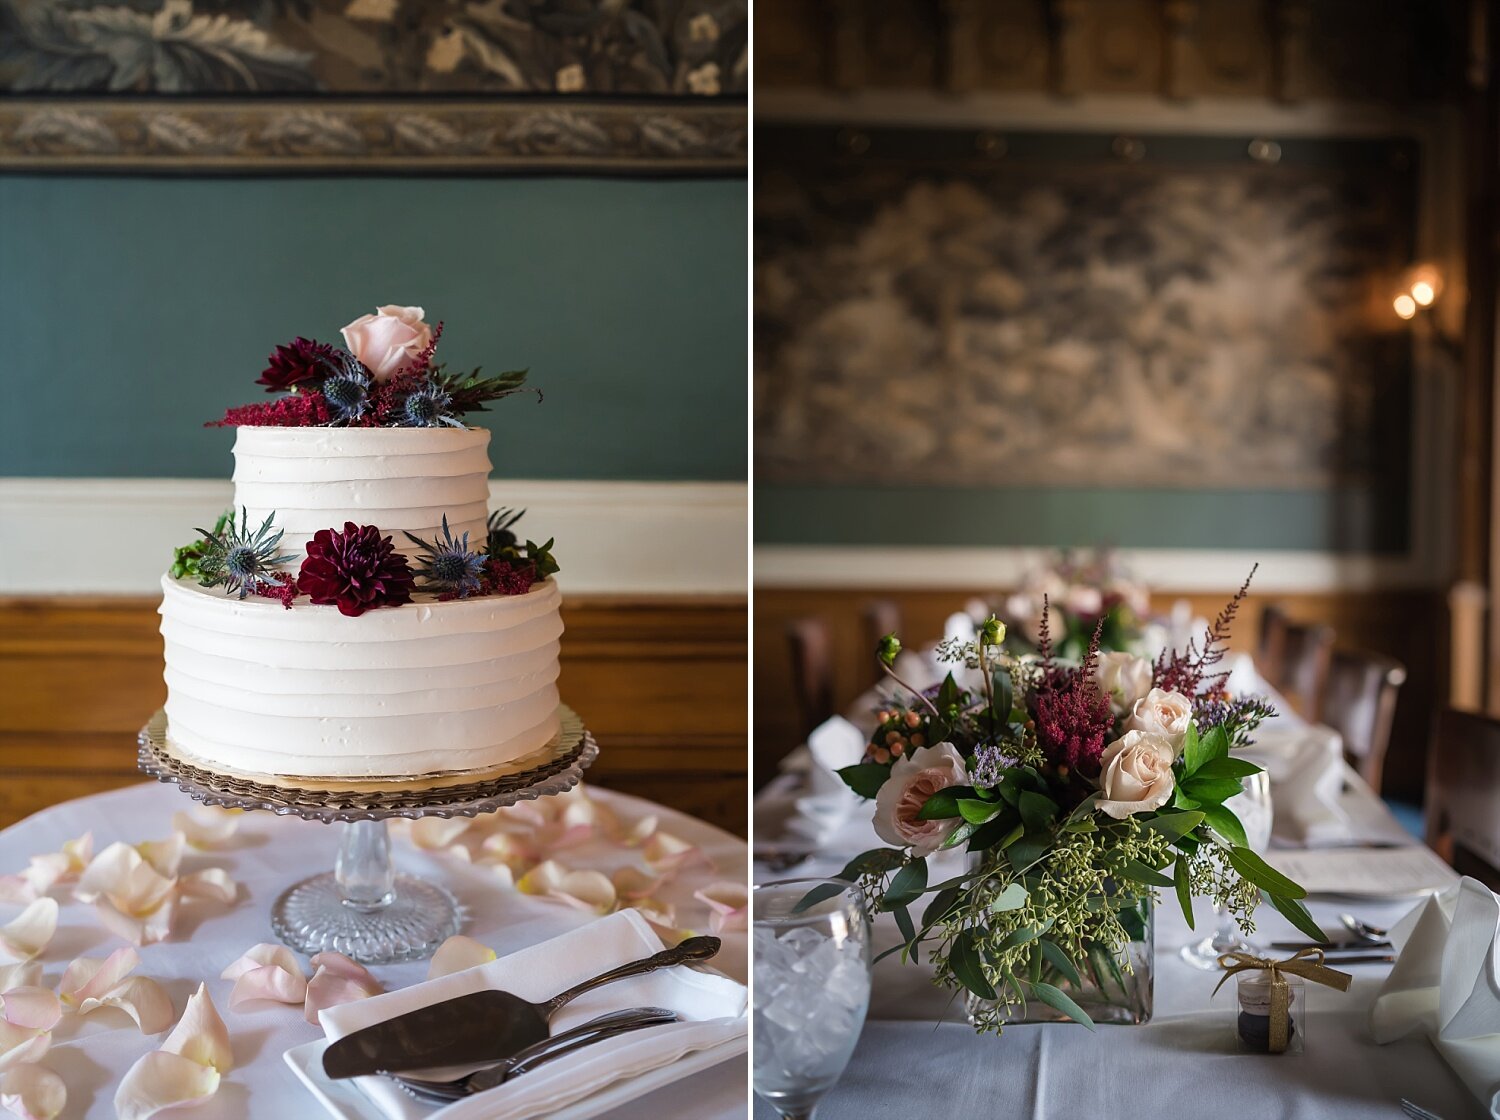  A wedding cake and a beautiful green, blush, and red floral centerpiece on a long table.  